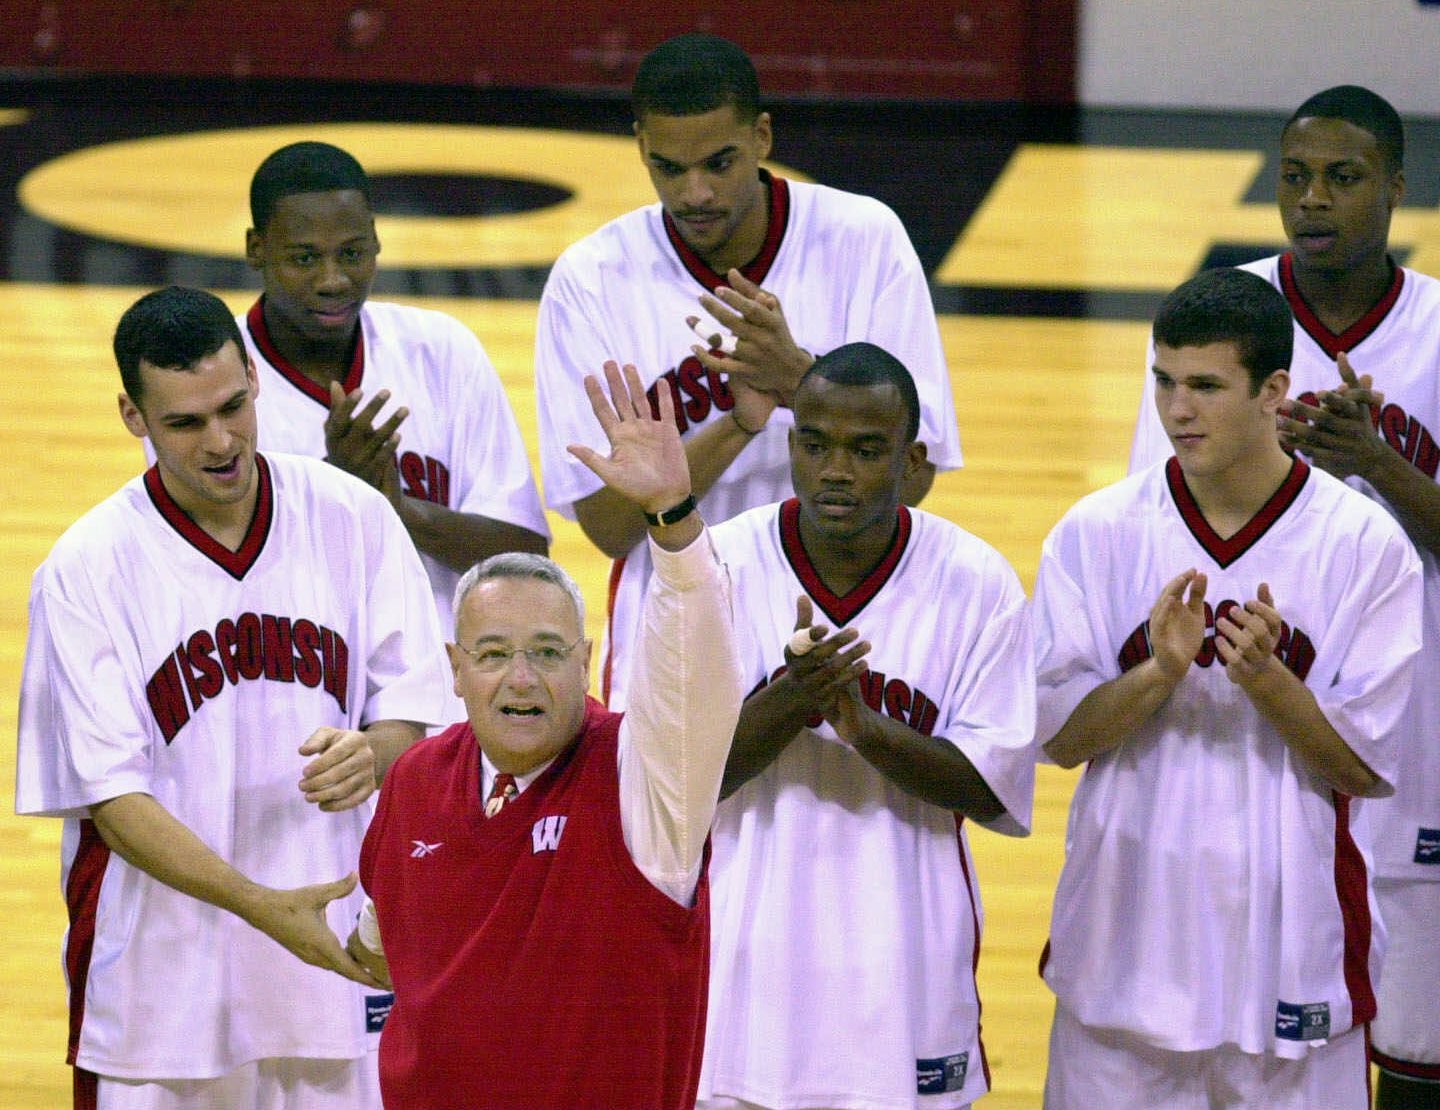 Proud pop: Wisconsin’s Dick Bennett beams as son leads Virginia to title